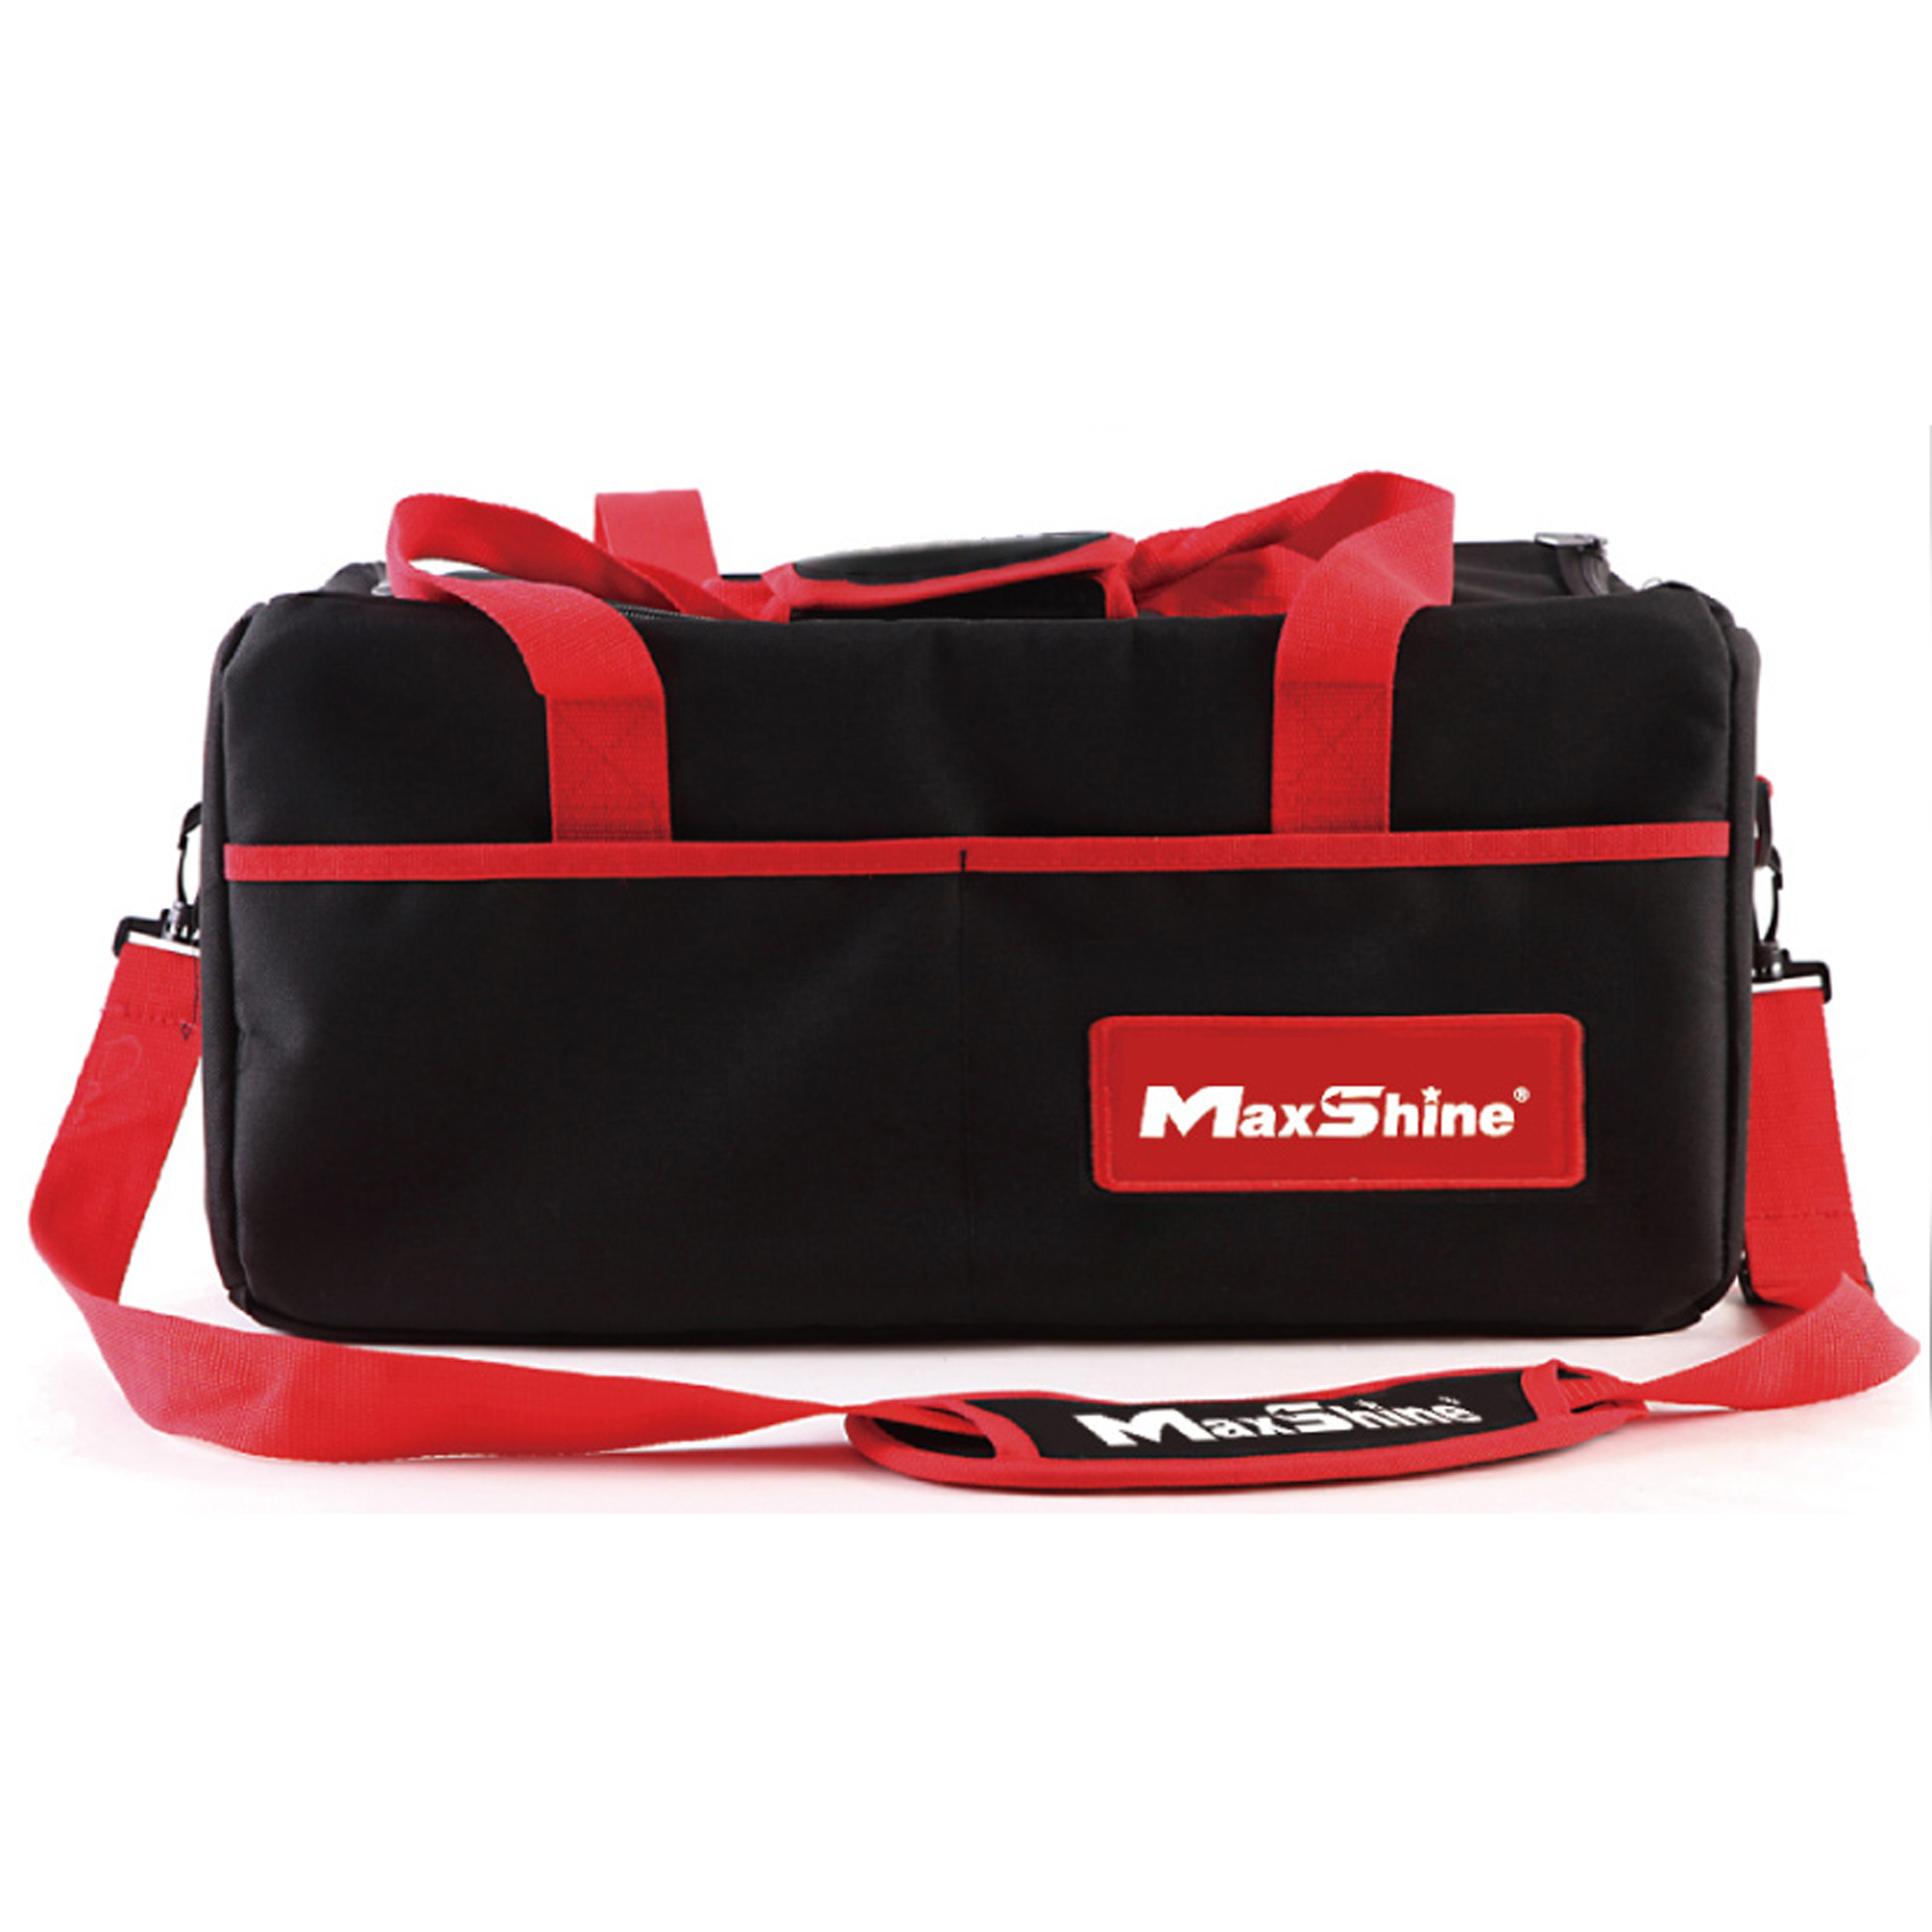 Deluxe Tool Bag | Detailing Tool Bag - 600D Oxford Fabric | with Belt and Handle, The Detailers' Essential